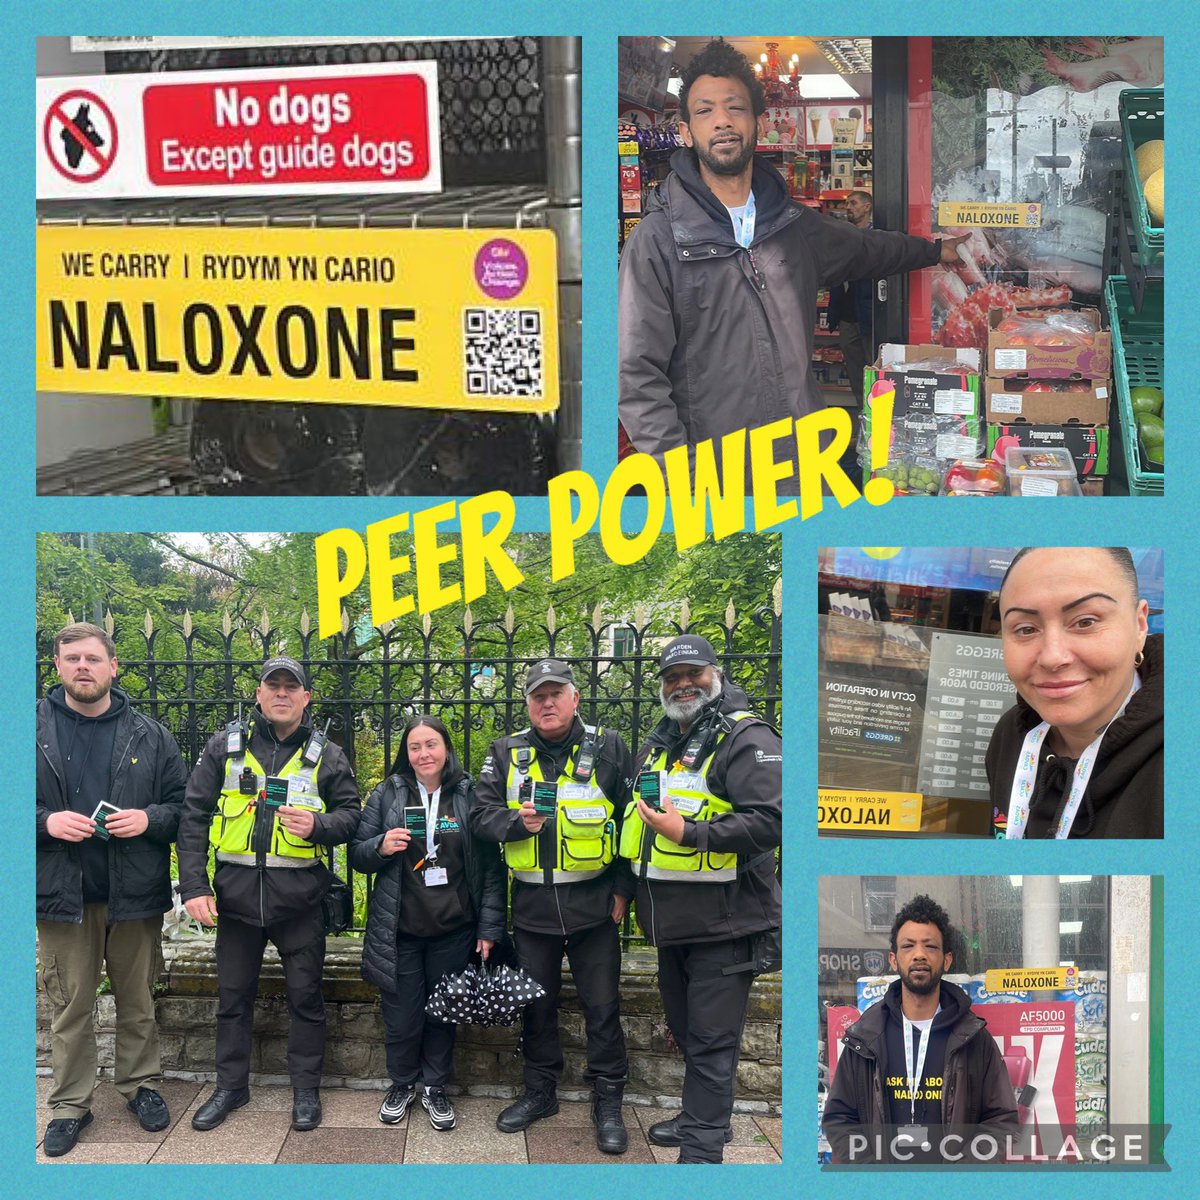 The peers have been out and about this week training shop keepers and they also issued the City wardens with naloxone replenishment. Great work everyone. 👏🏽👏🏽👏🏽👏🏽👏🏽 #naloxonesaveslives #peerpower